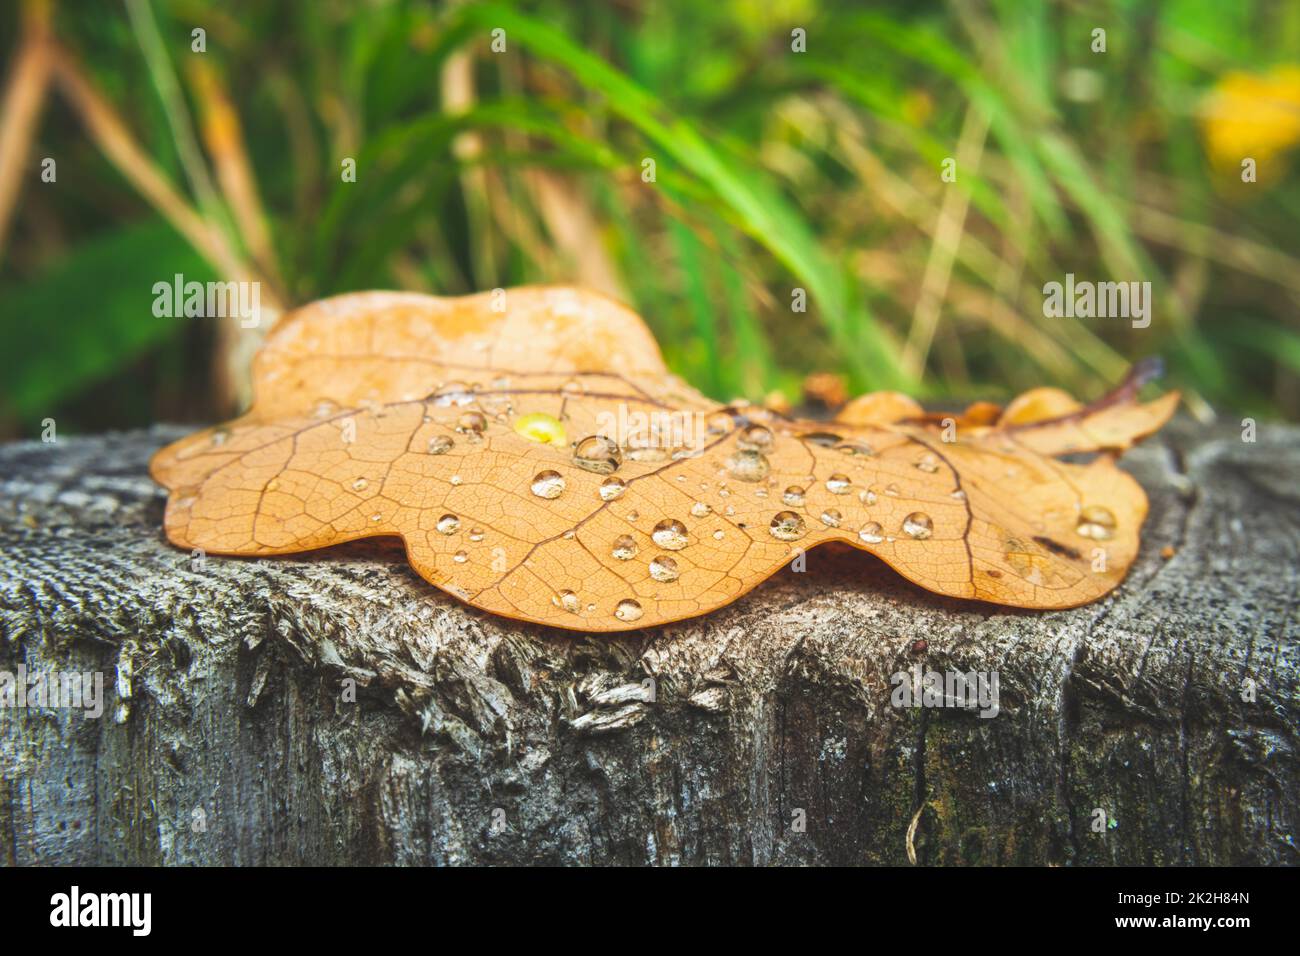 Oak leaf with water drops lying on the stump Stock Photo